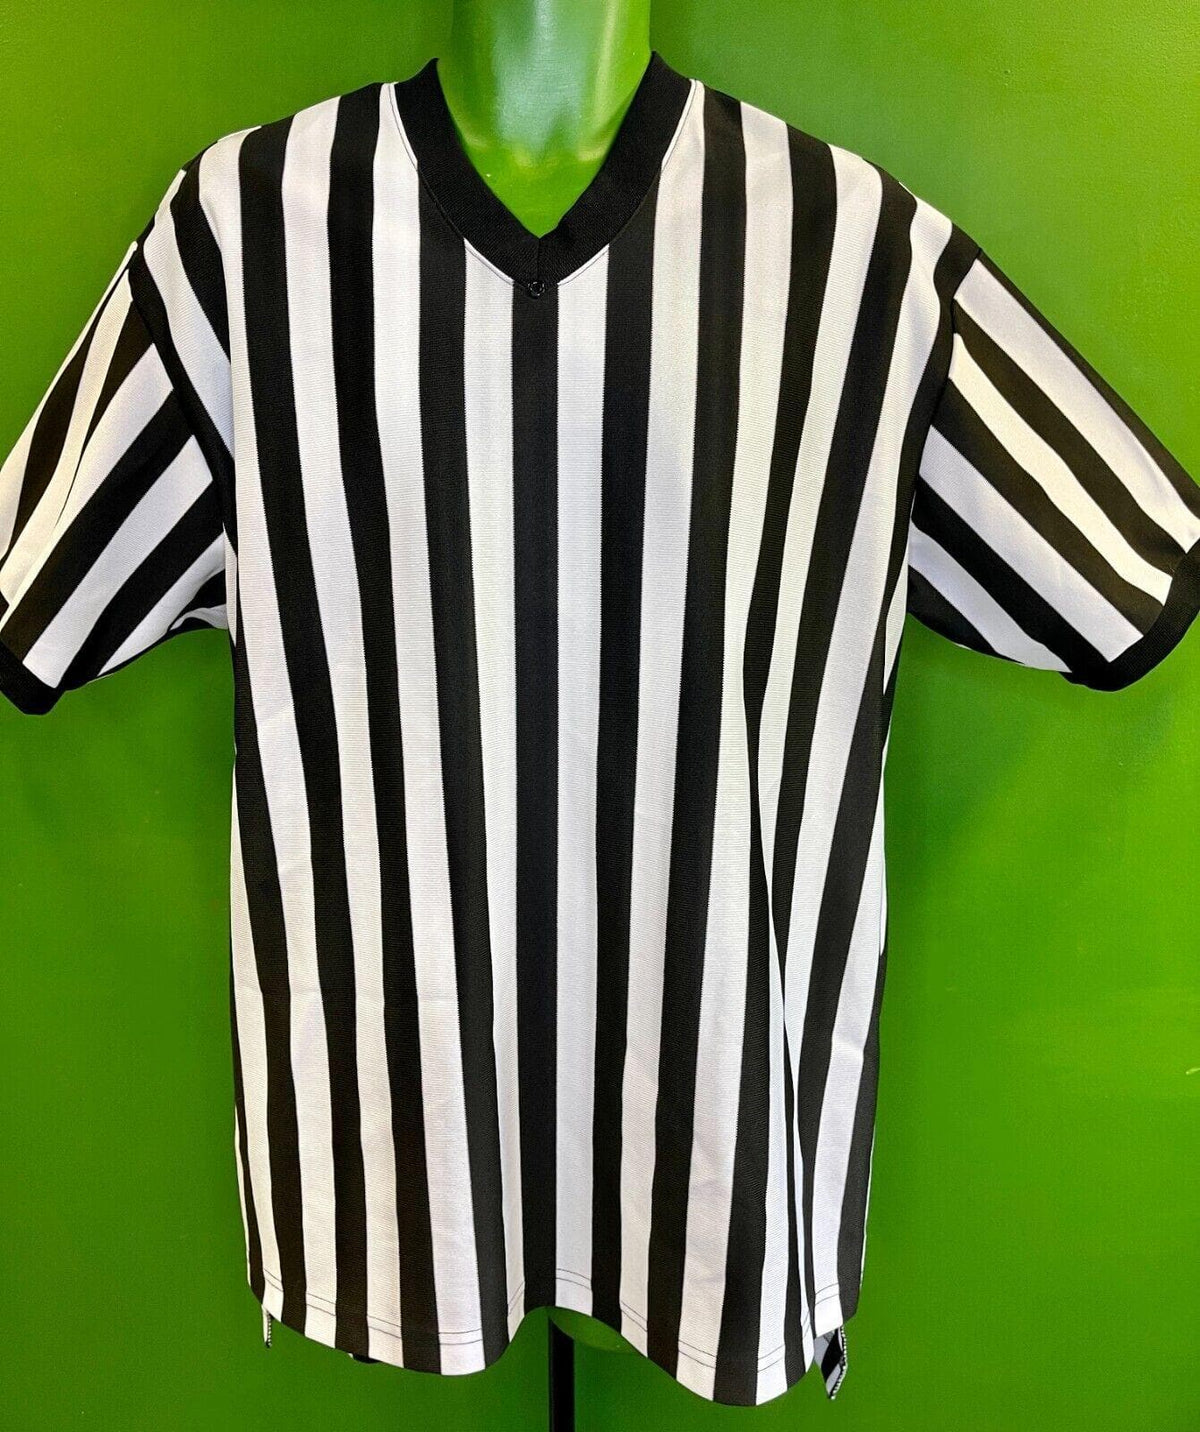 American Football Referee Top Jersey Men's 2X-Large (54")